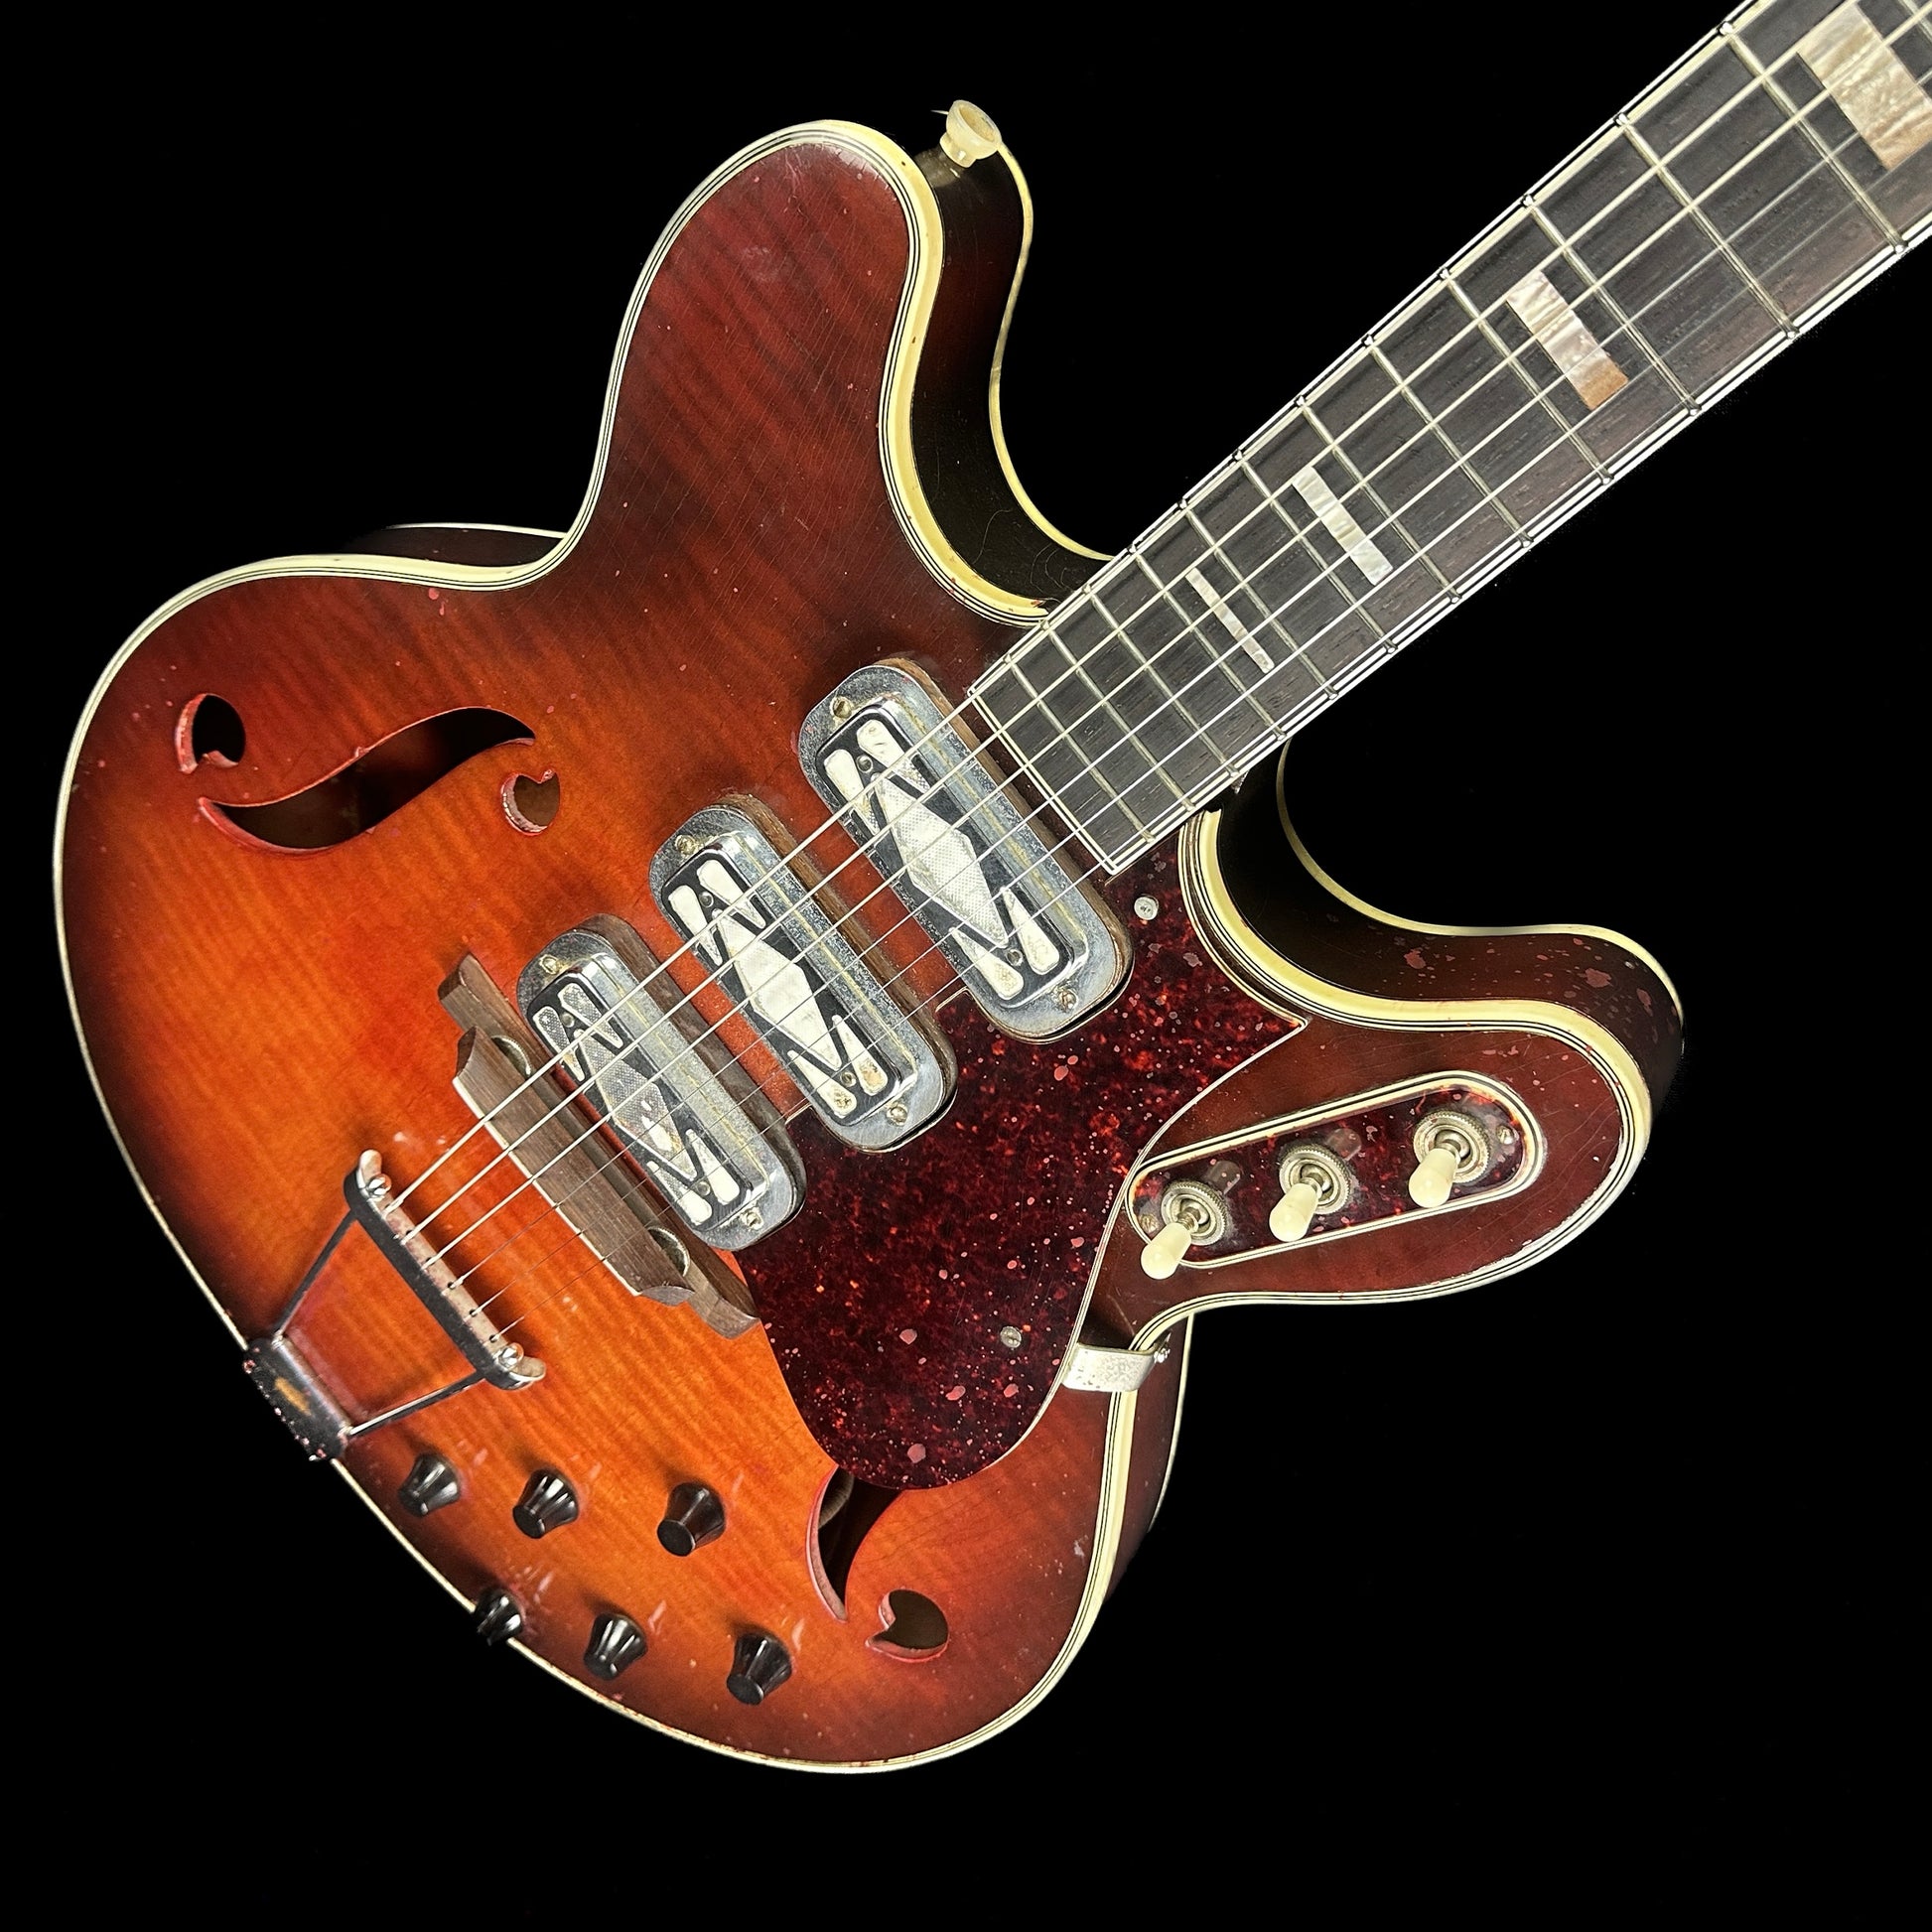 Front angle of Vintage Silvertone 1454 Double Cut Redburst.